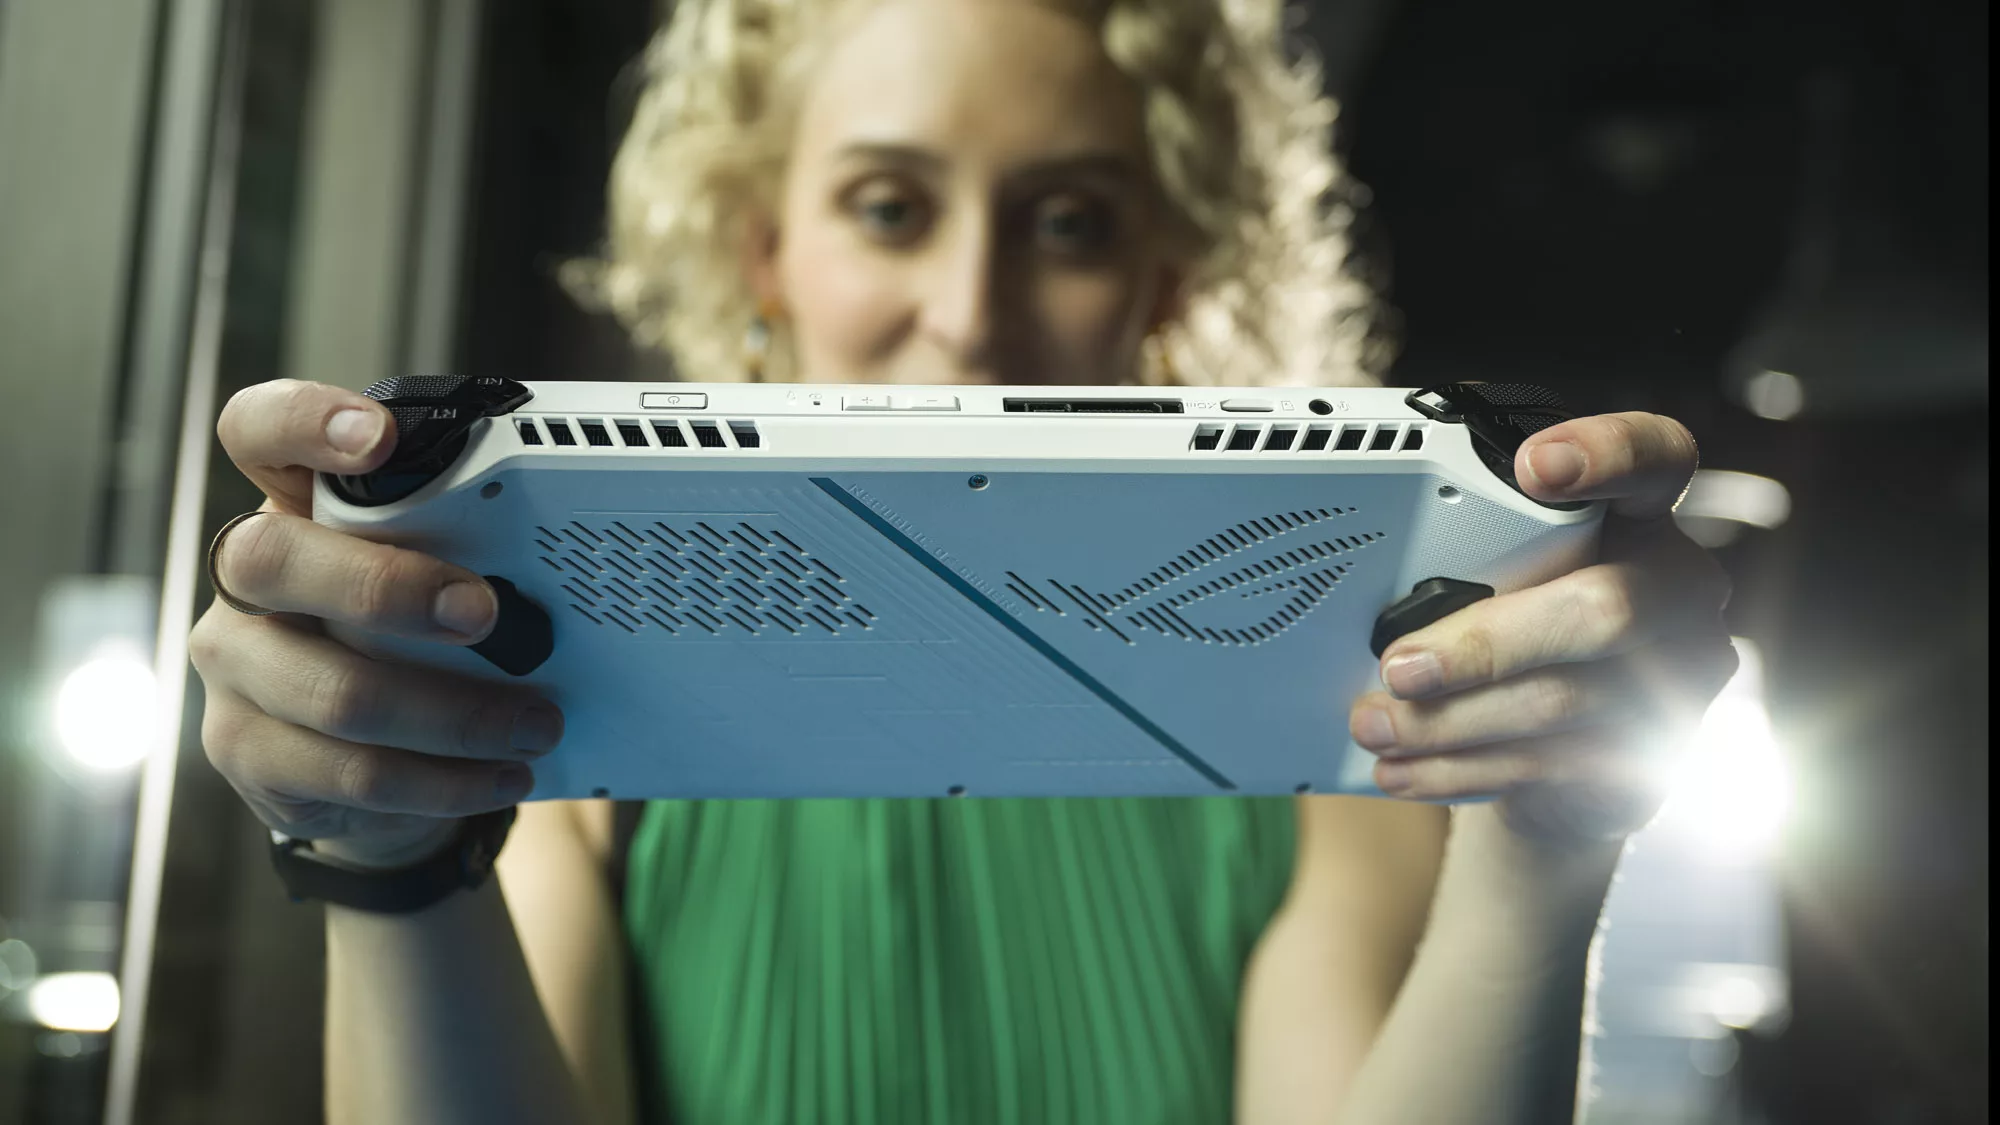 A woman holding the ROG Ally in her hands, showing a rear view of the console.